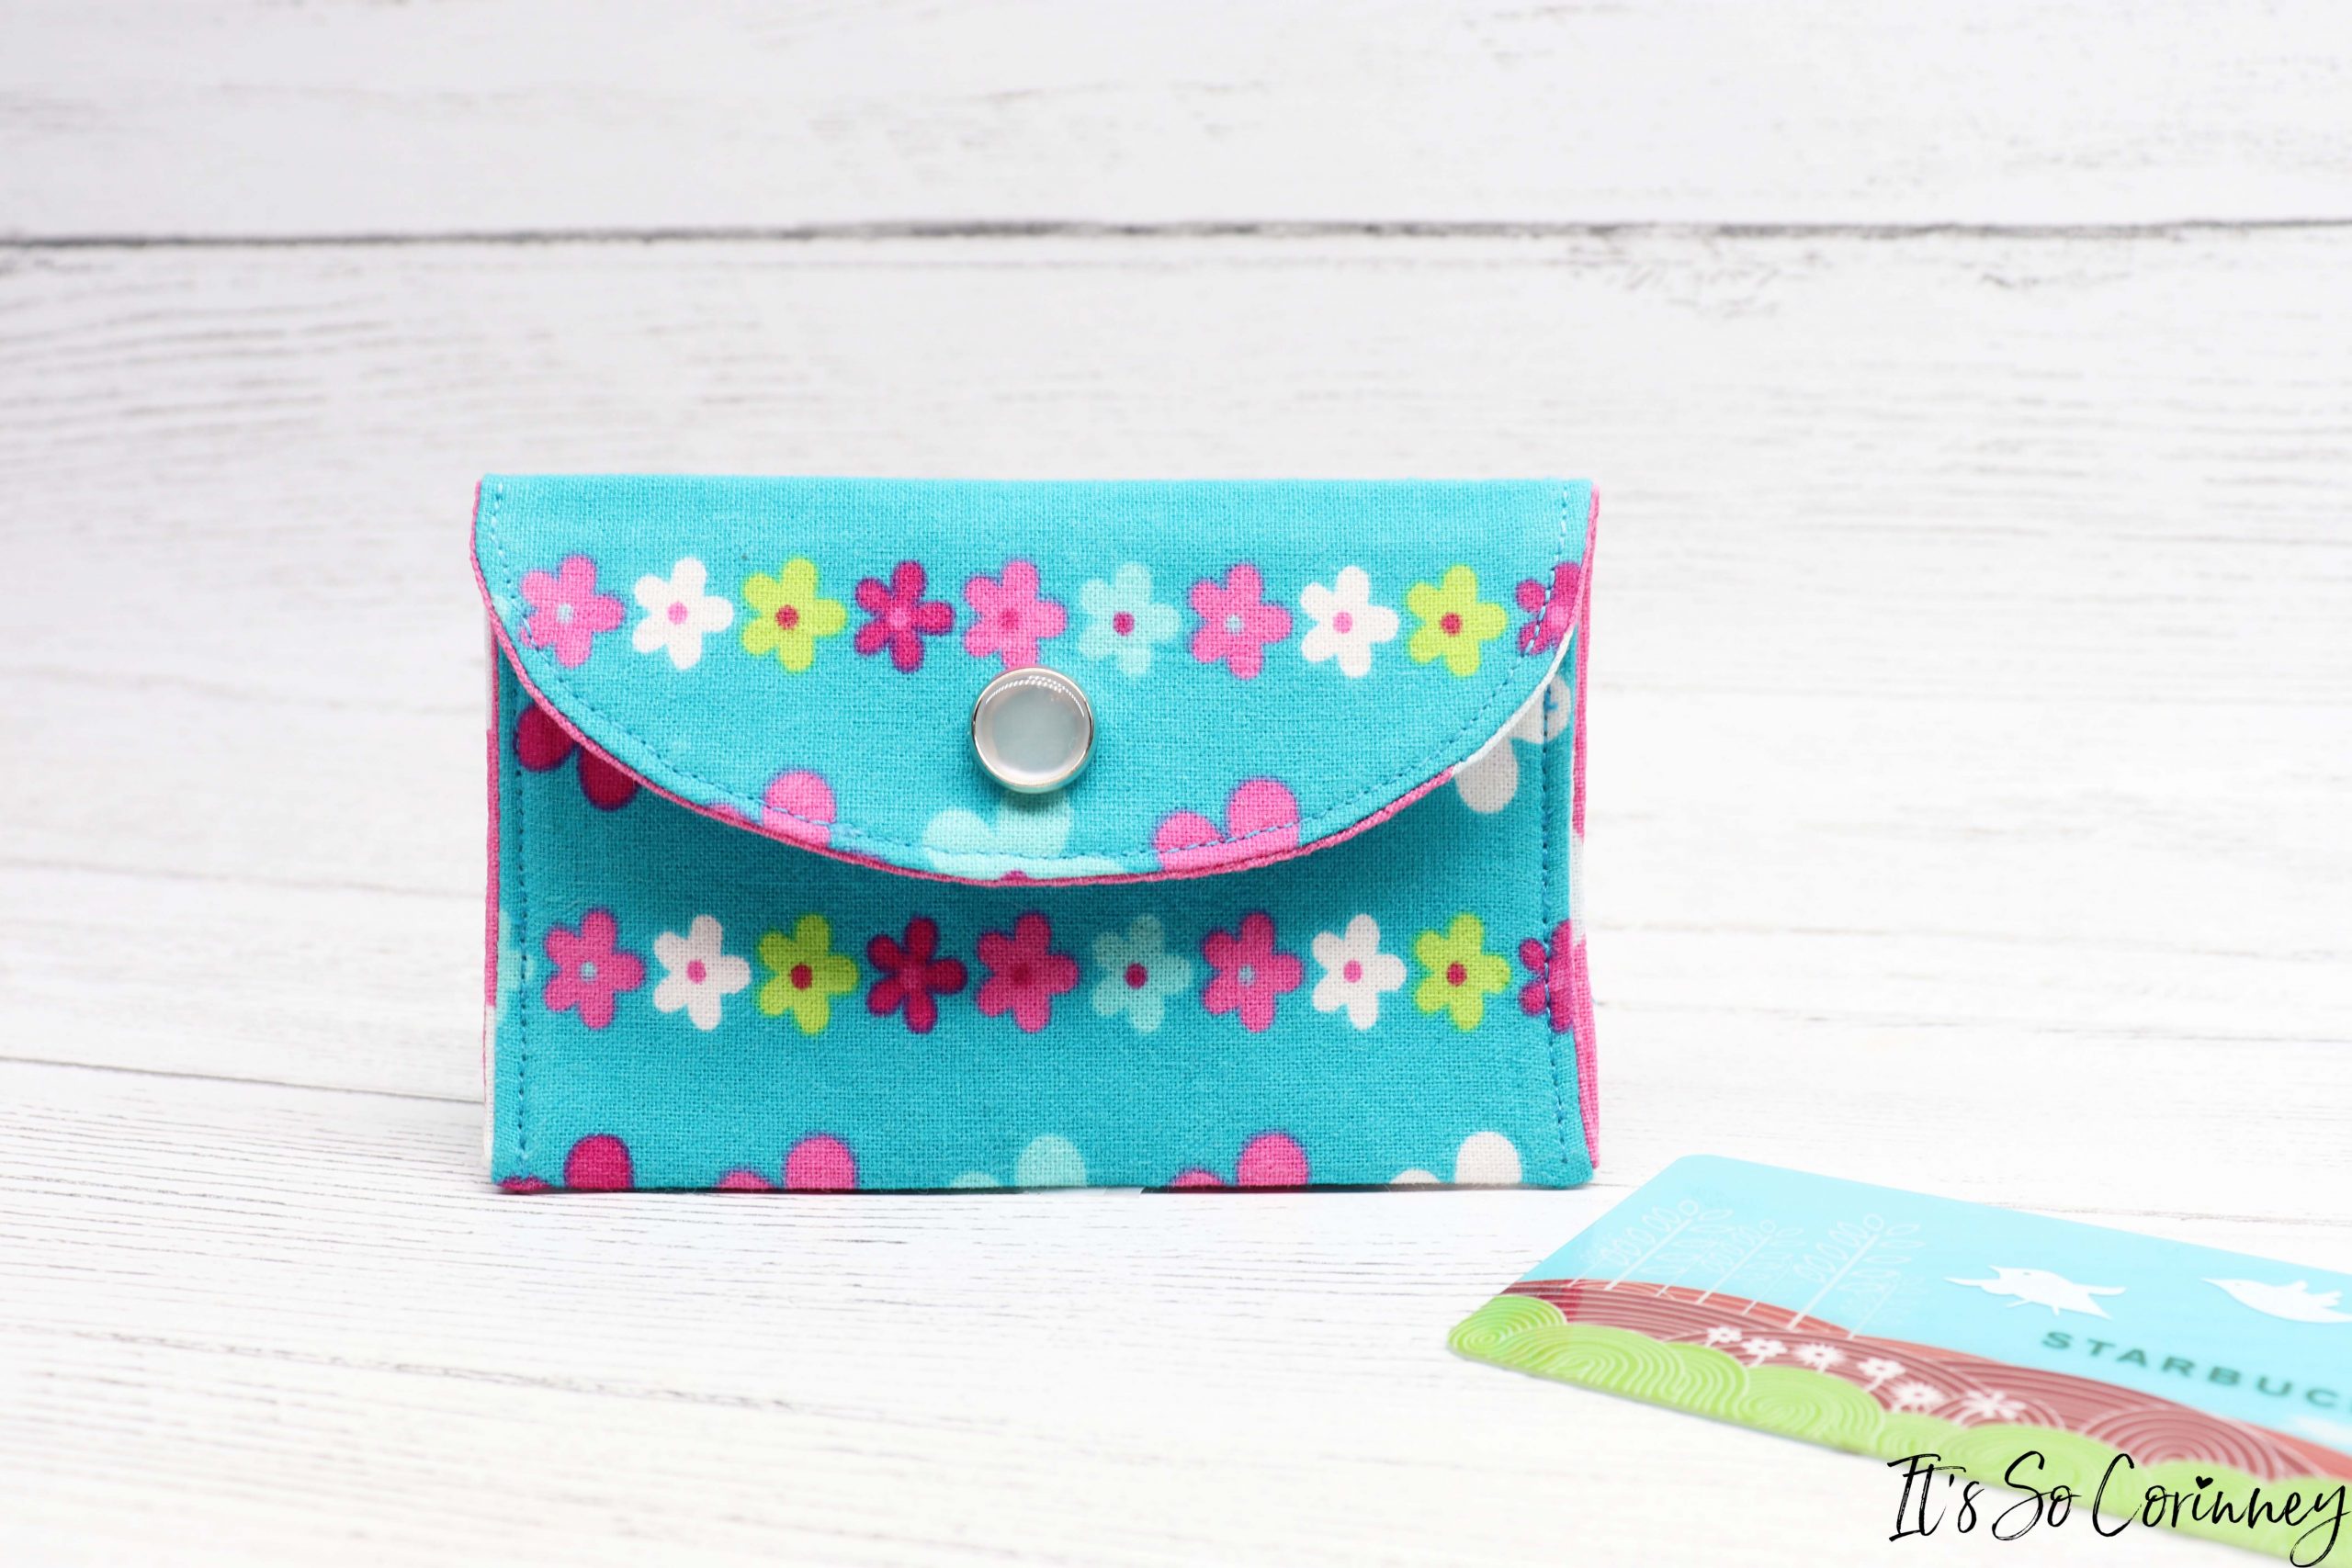 How to sew a credit card wallet - Crafts on display